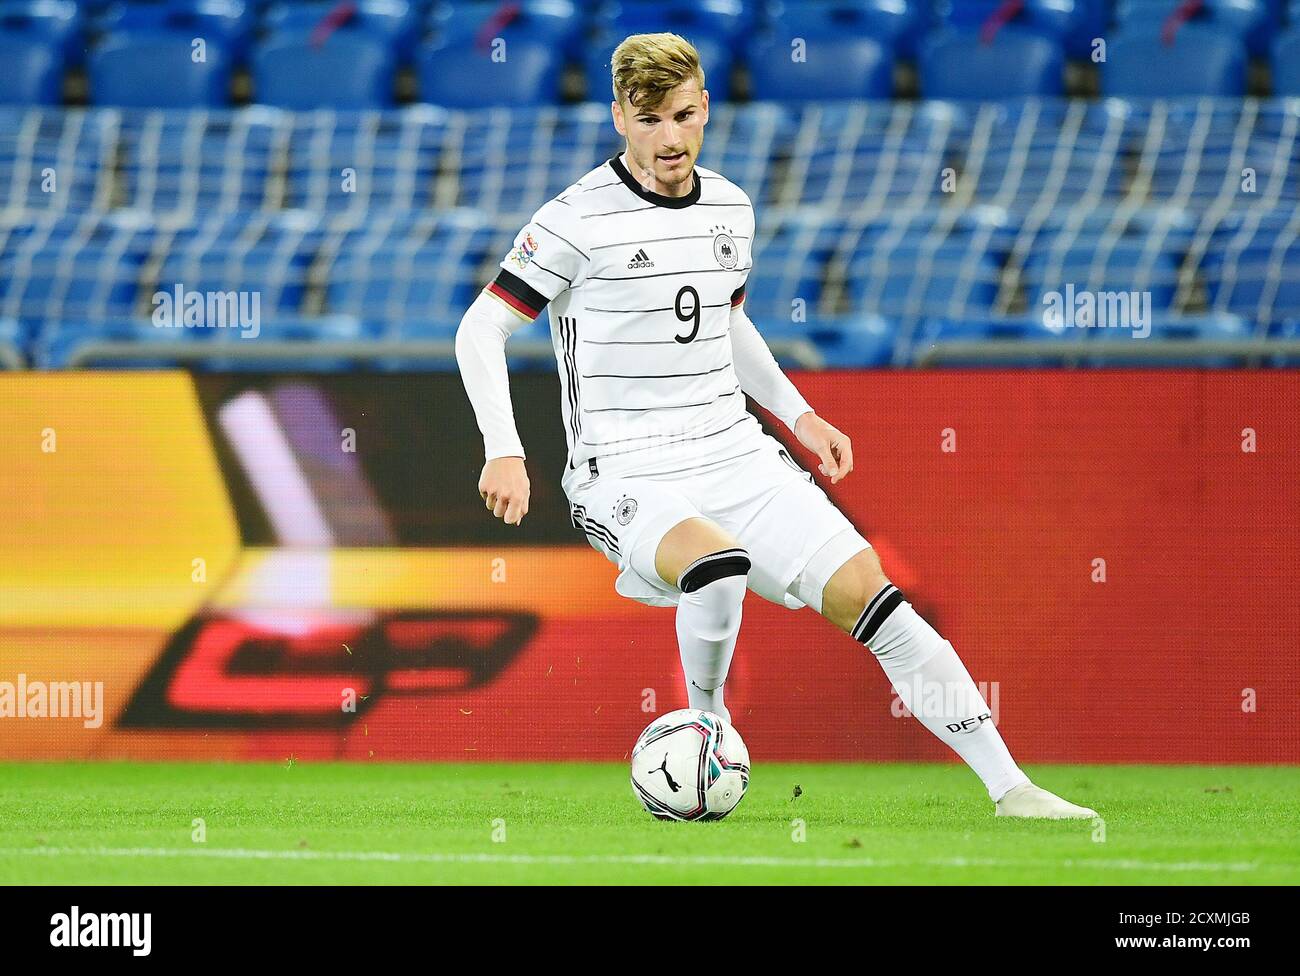 Timo Werner (Deutschland) Basel, 06.09.2020, Fussball, UEFA Nations League,  Gruppenphase, Schweiz - Deutschland © Peter Schatz / Alamy Live News  /Valeria Witters/Witters/Pool UEFA regulations prohibit any use of  photographs as image sequences